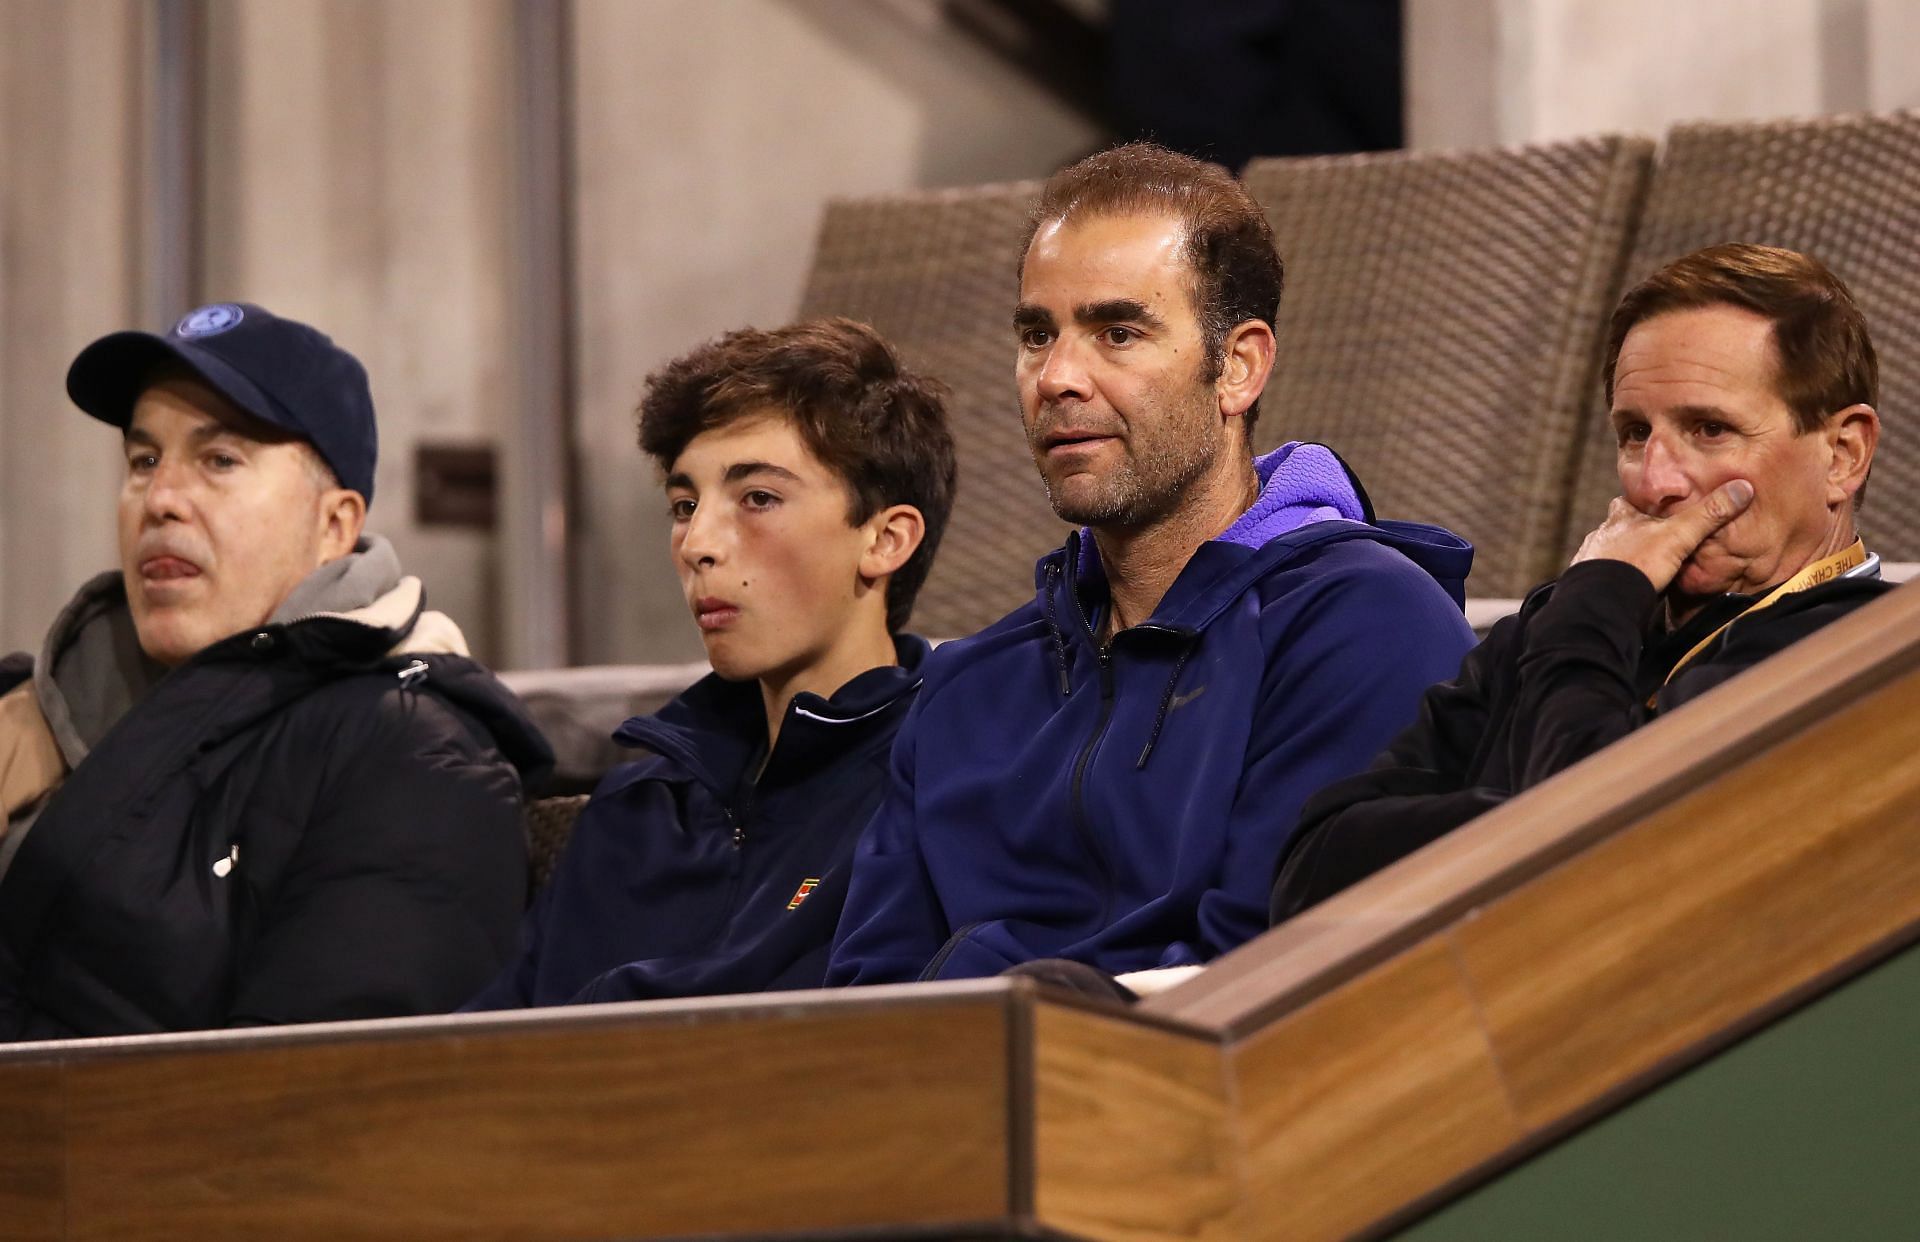 Pete Sampras at the 2019 Indian Wells Masters